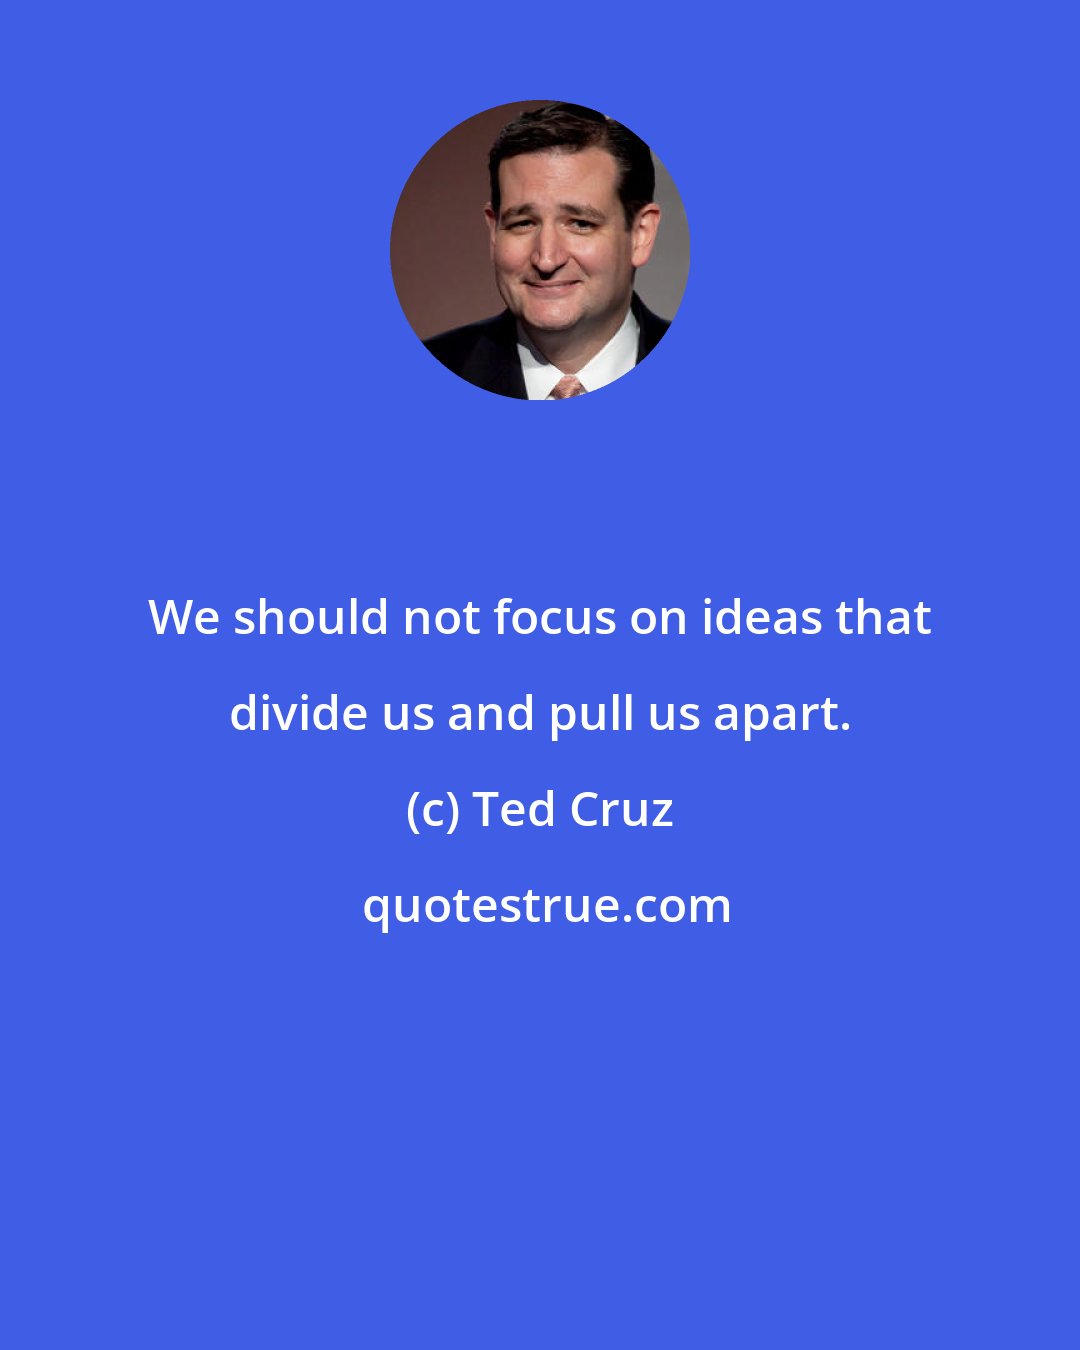 Ted Cruz: We should not focus on ideas that divide us and pull us apart.